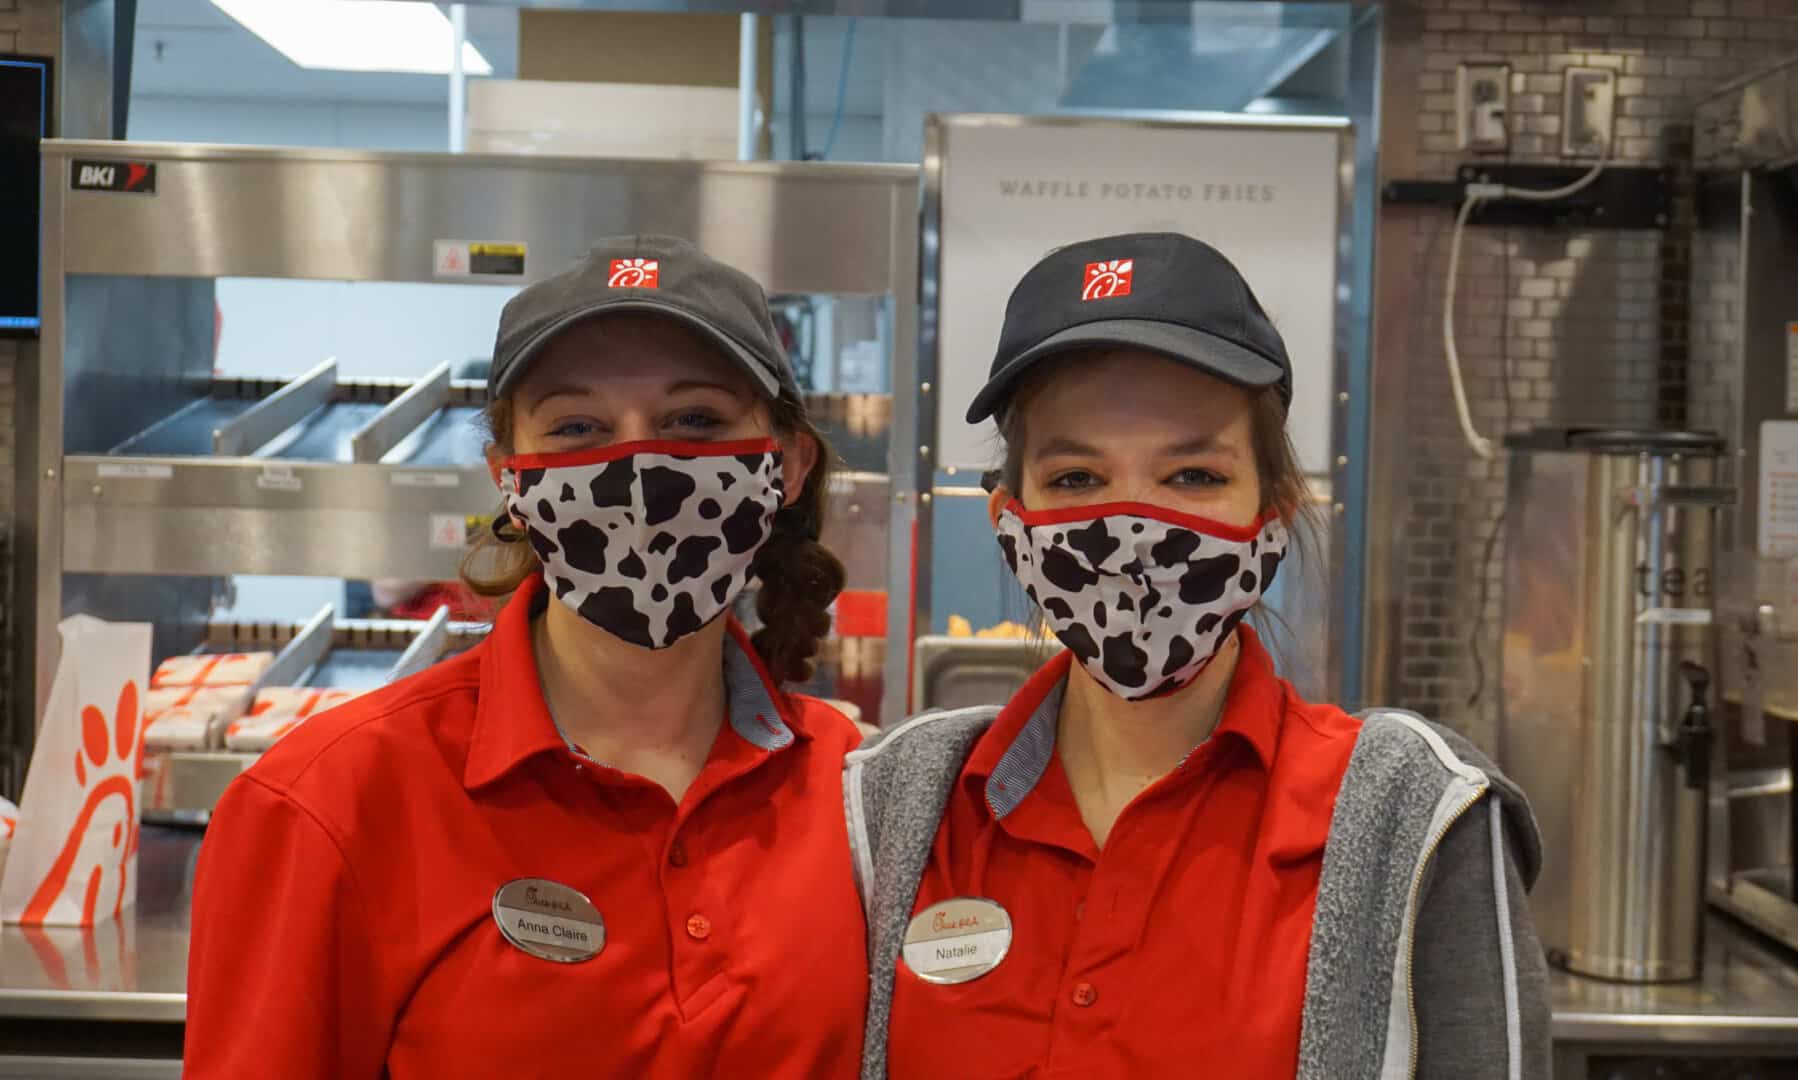 If you are a frequent evening customer, you will recognize these two. Anna Claire Jenkins (left) is a sophomore at North Greenville. She loves working at Chick-fil-A because of the people. Next to her is Natalie Welch who is a junior. Just like Anna